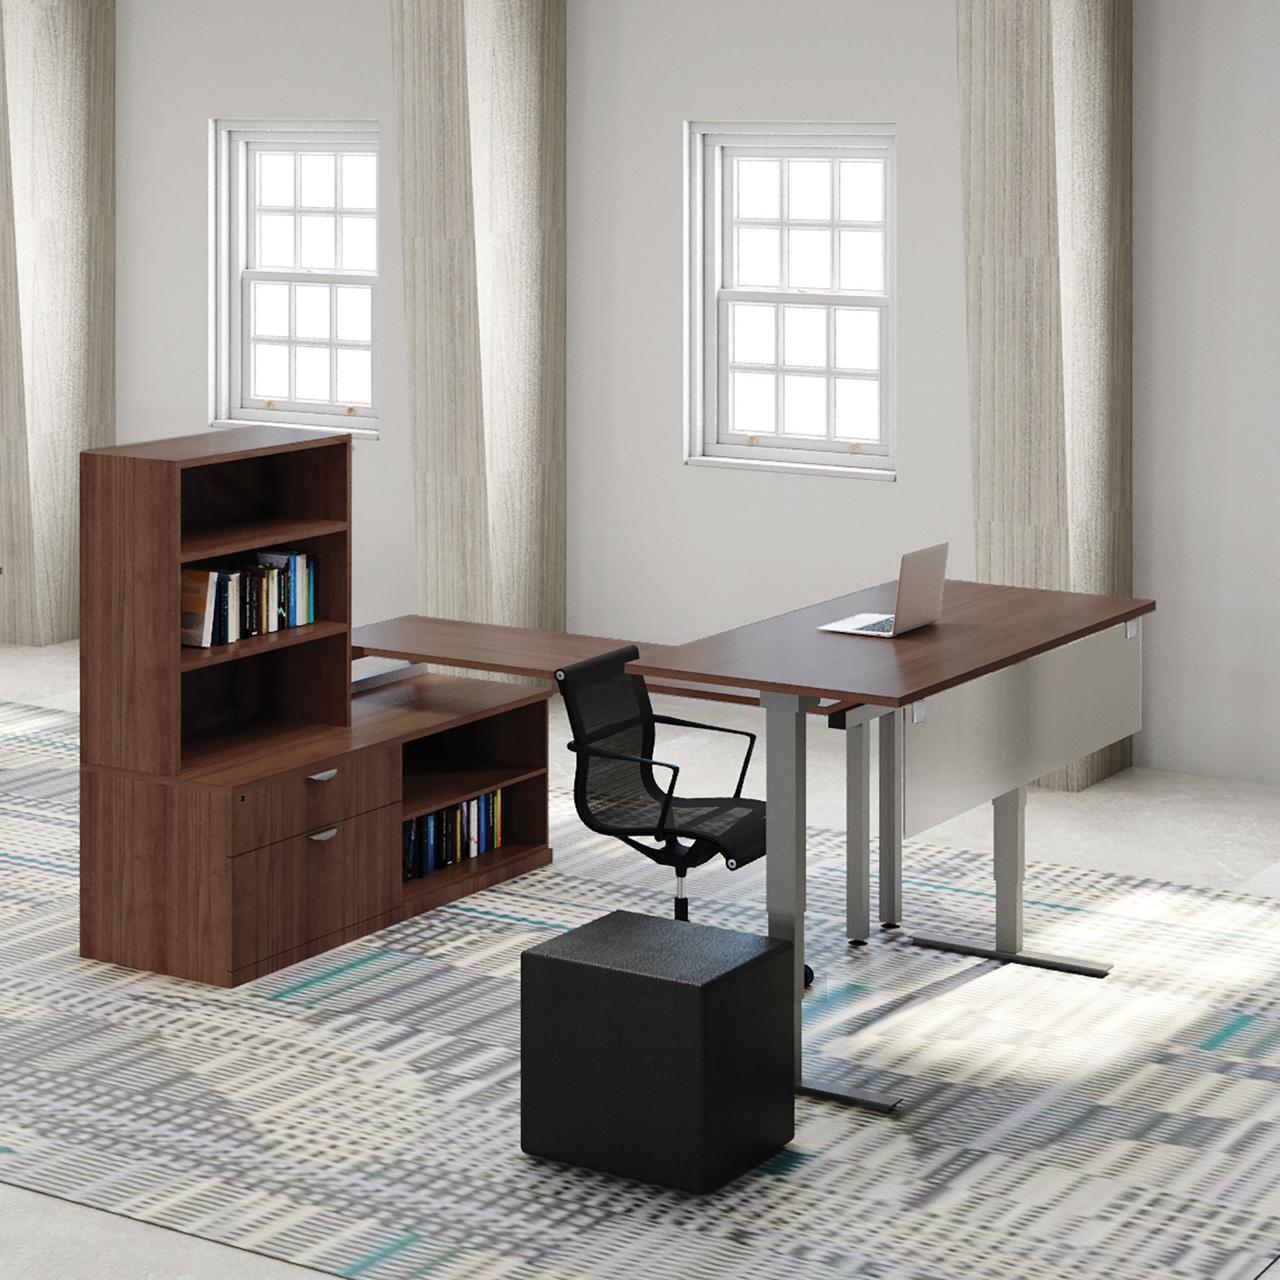 OS Laminate Series U Shaped Desk with Hutch and Storage